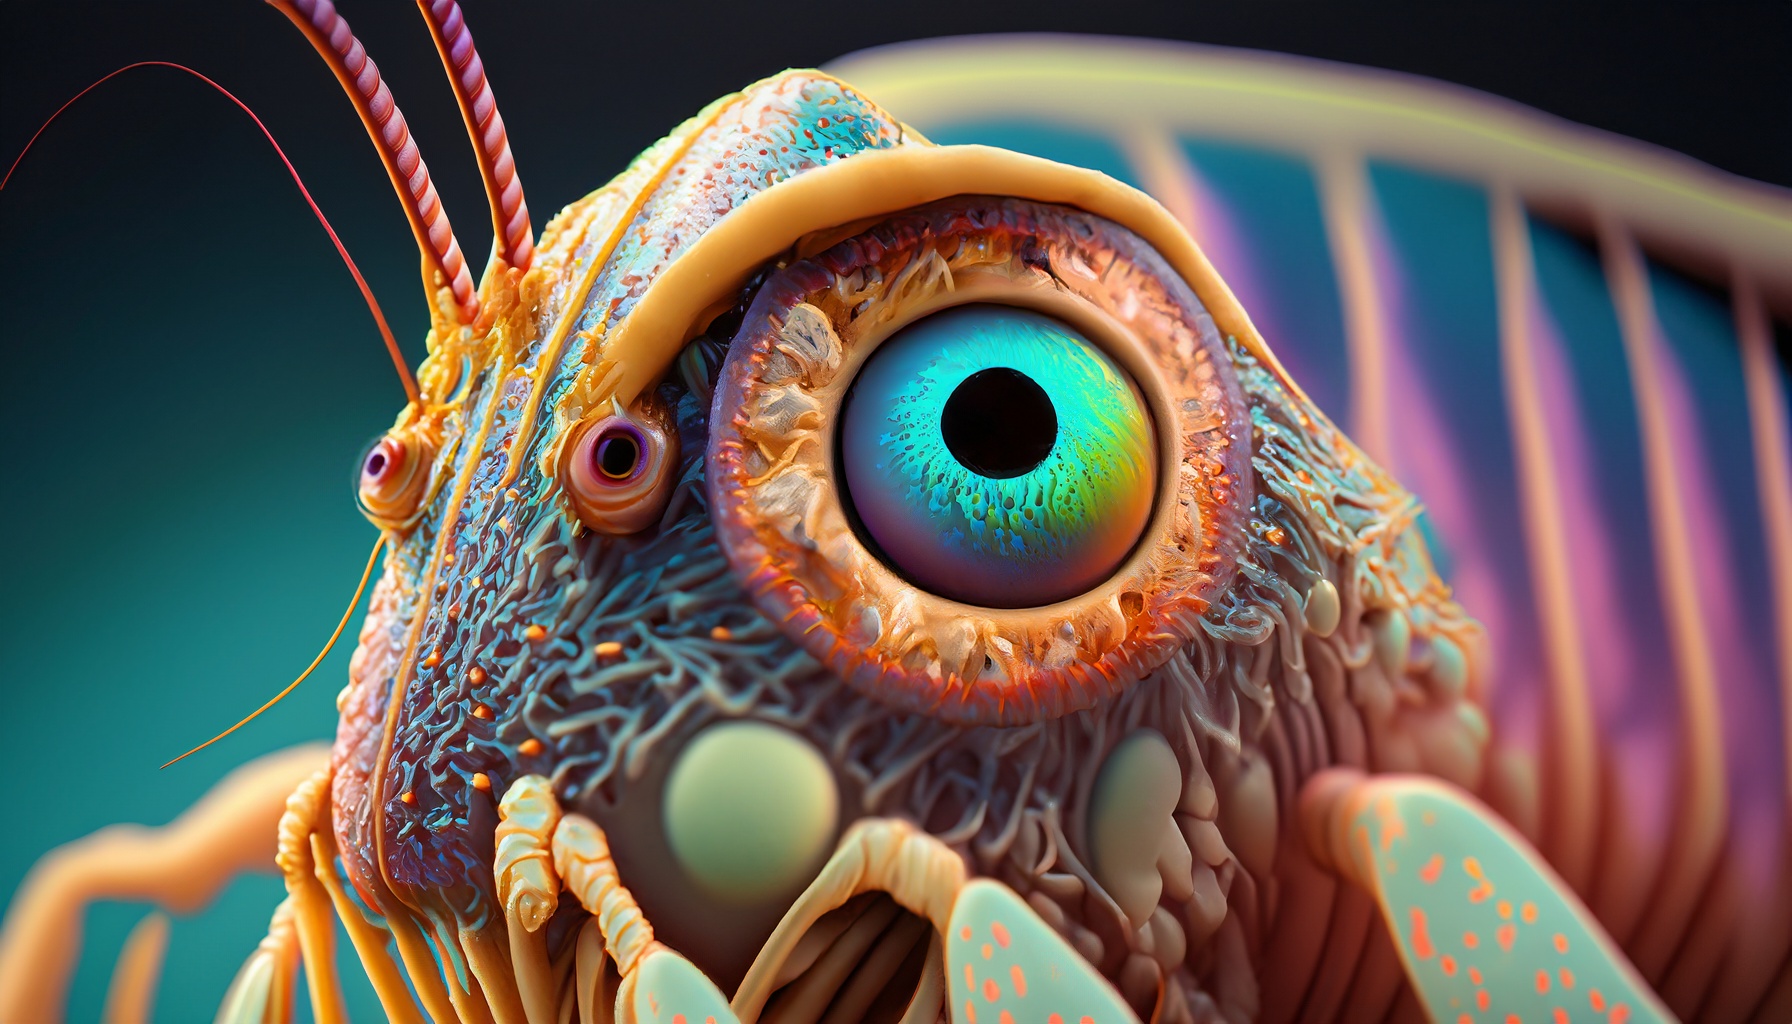 The mantis shrimp has the most complex eyes in the animal kingdom